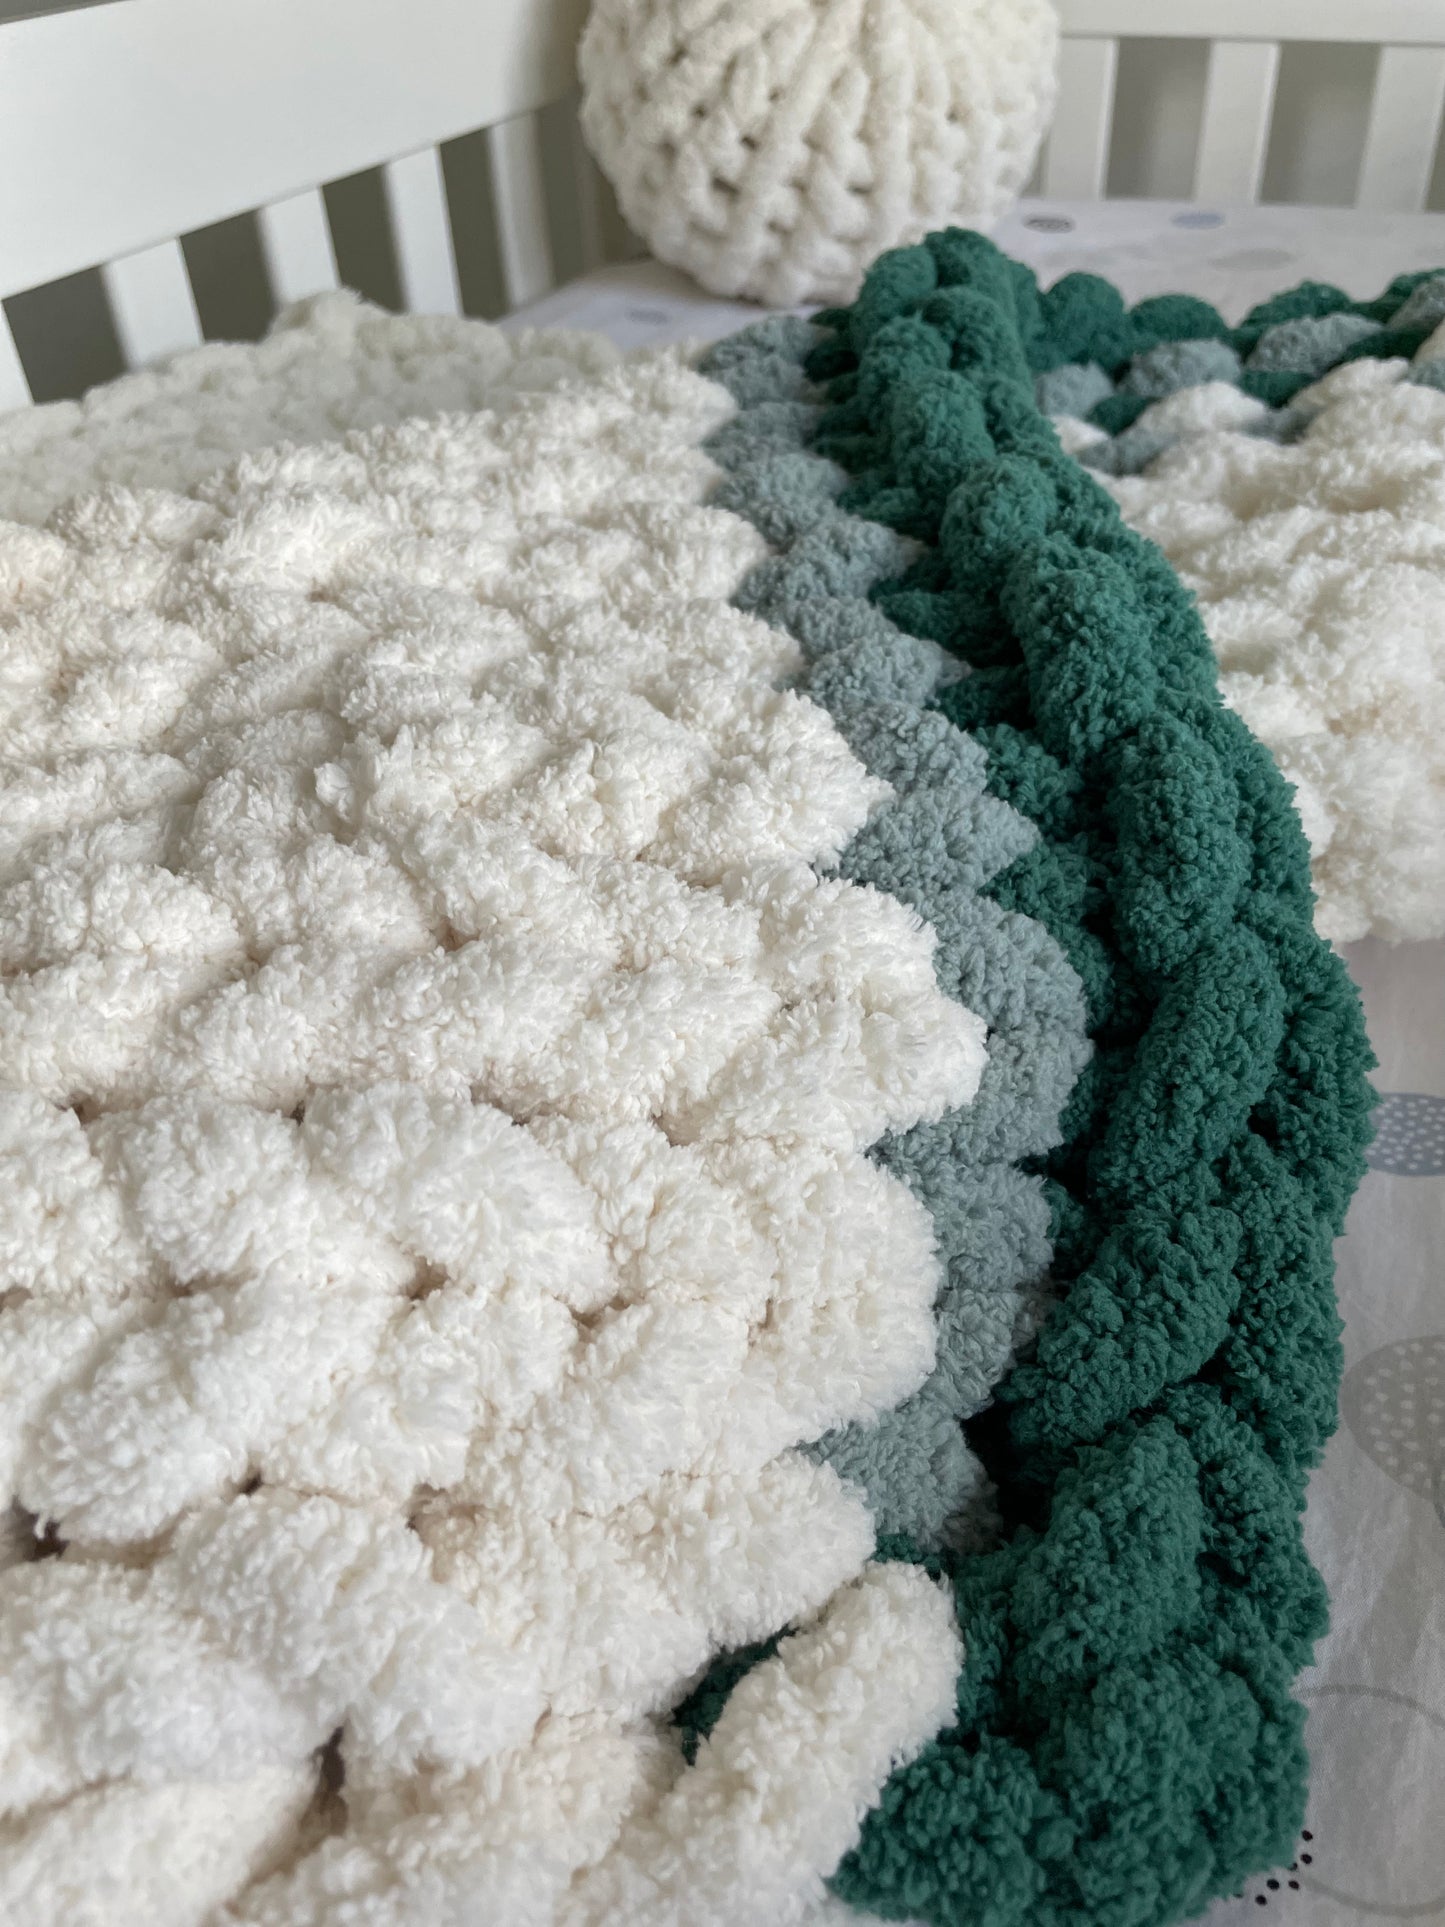 Healing Hand, Chunky Knit Baby Blankets - Emerald Green Accent